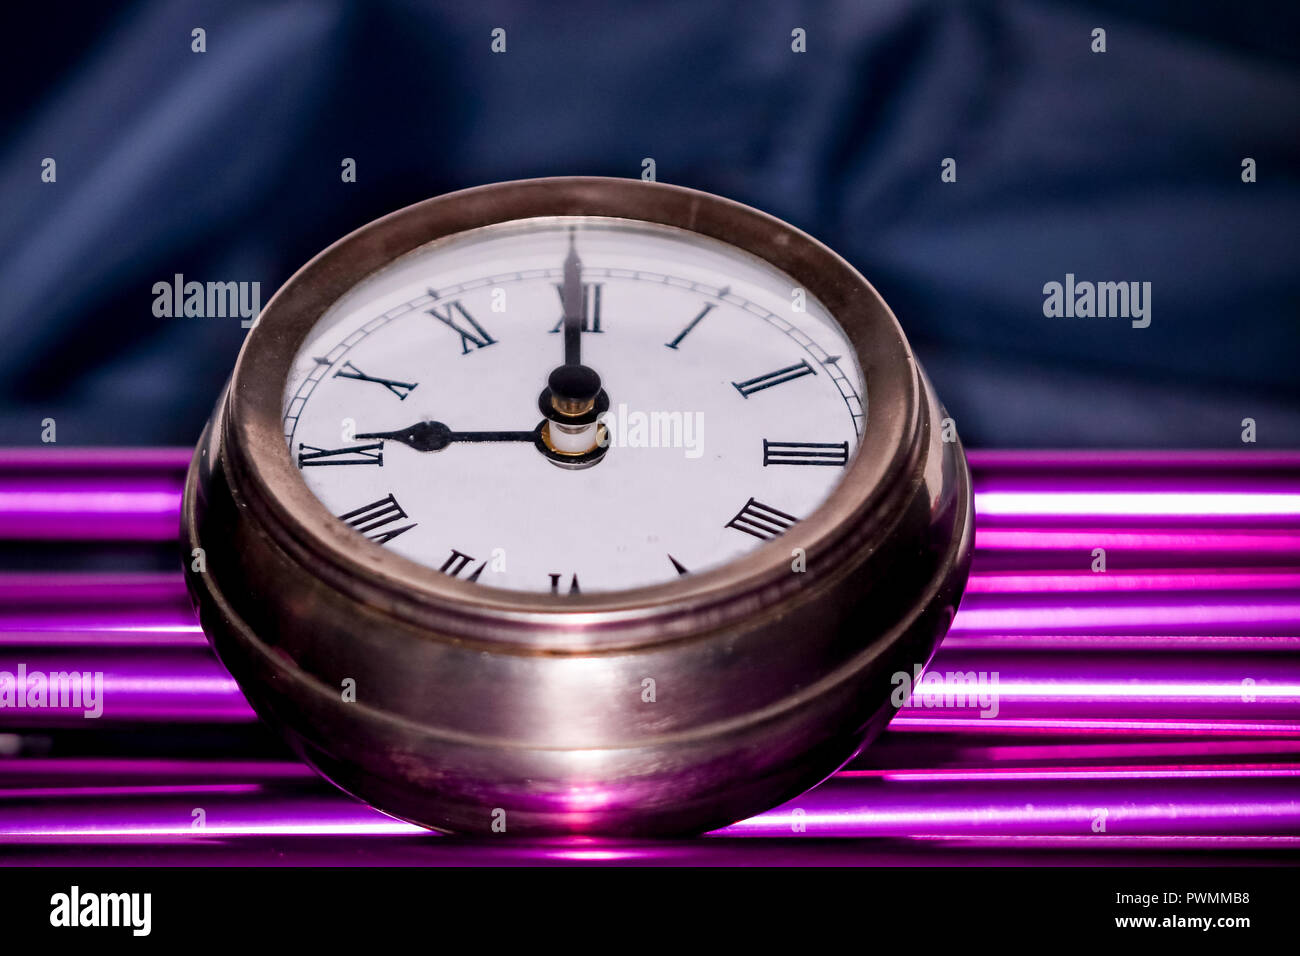 Arty shot of a metal large pocket watch clock on purple pipes Stock Photo